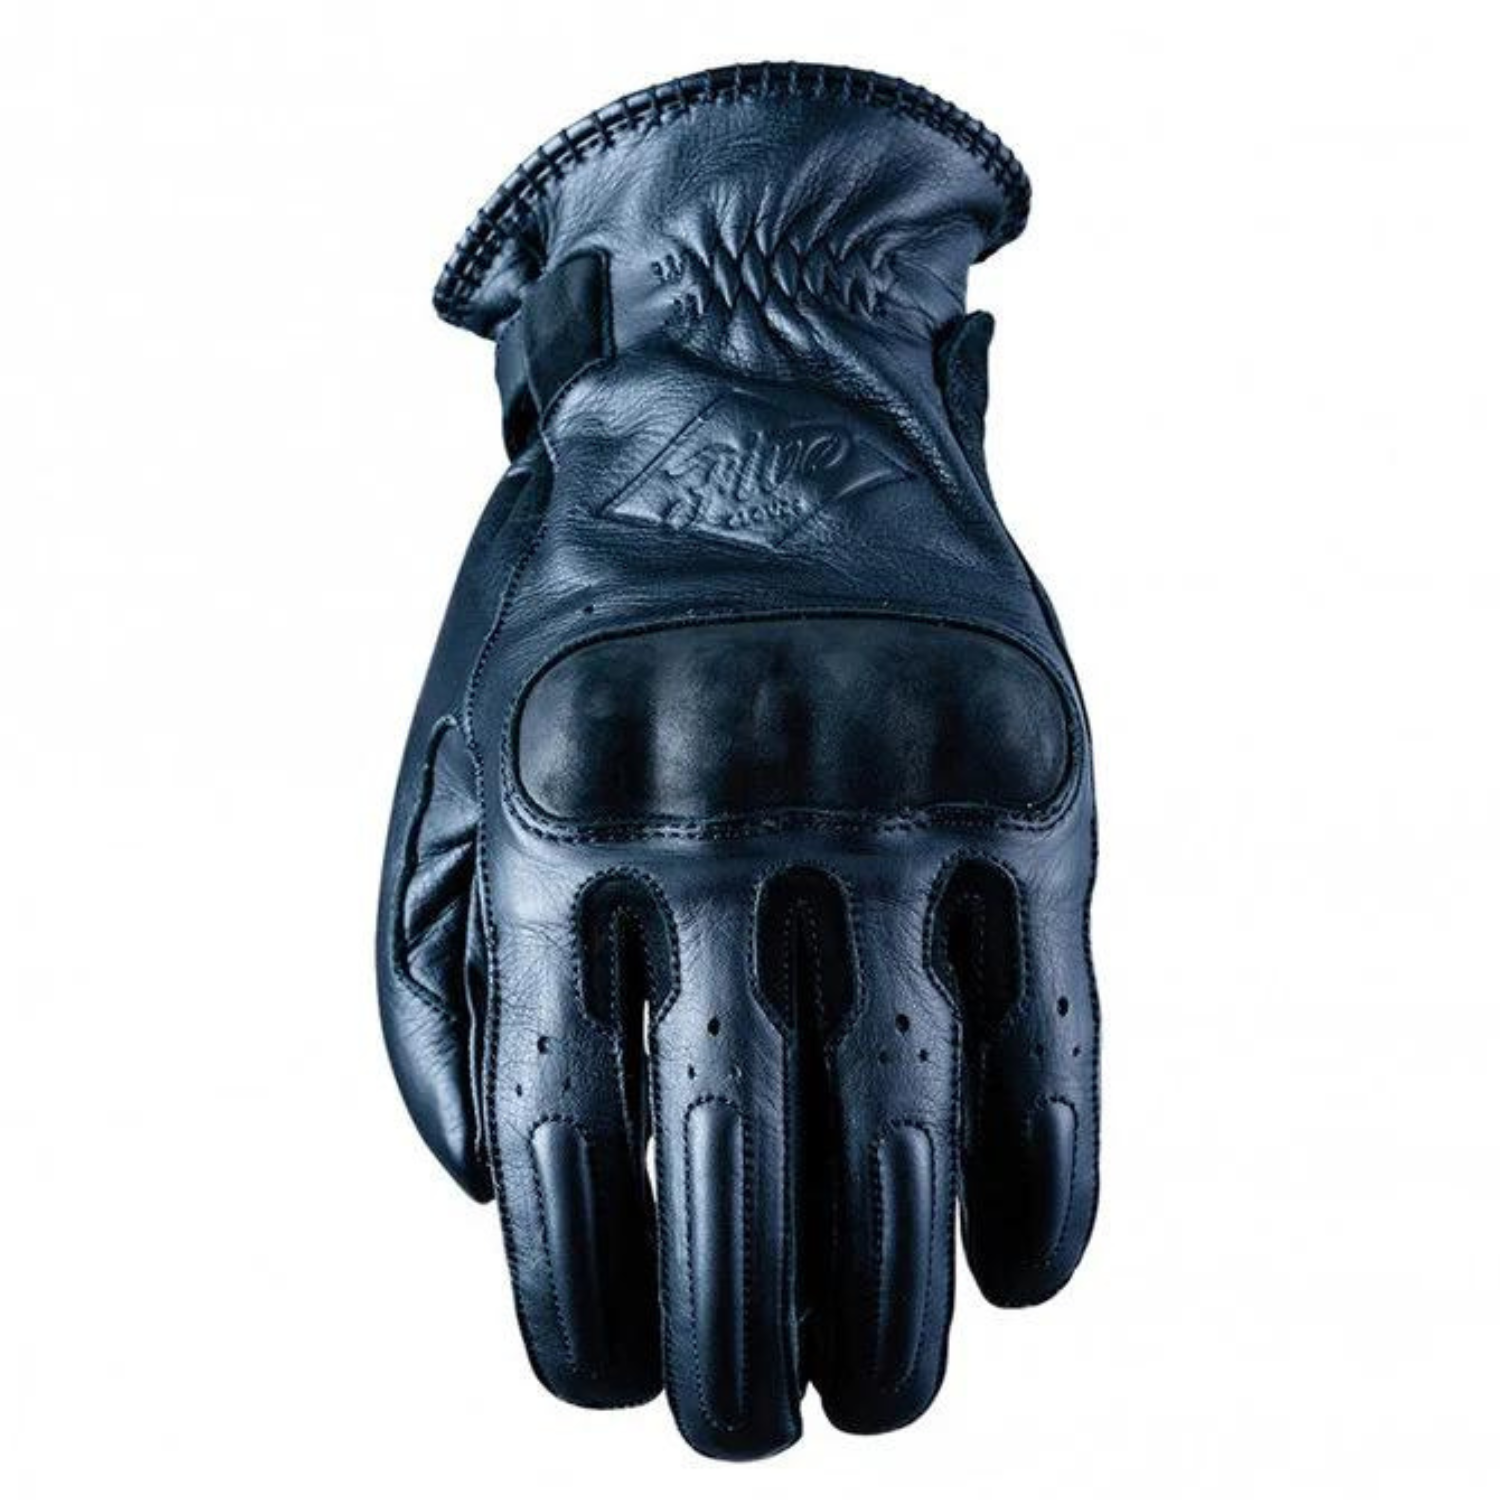 Image of Five Oklahoma Gloves Black Size M ID 4770916487597